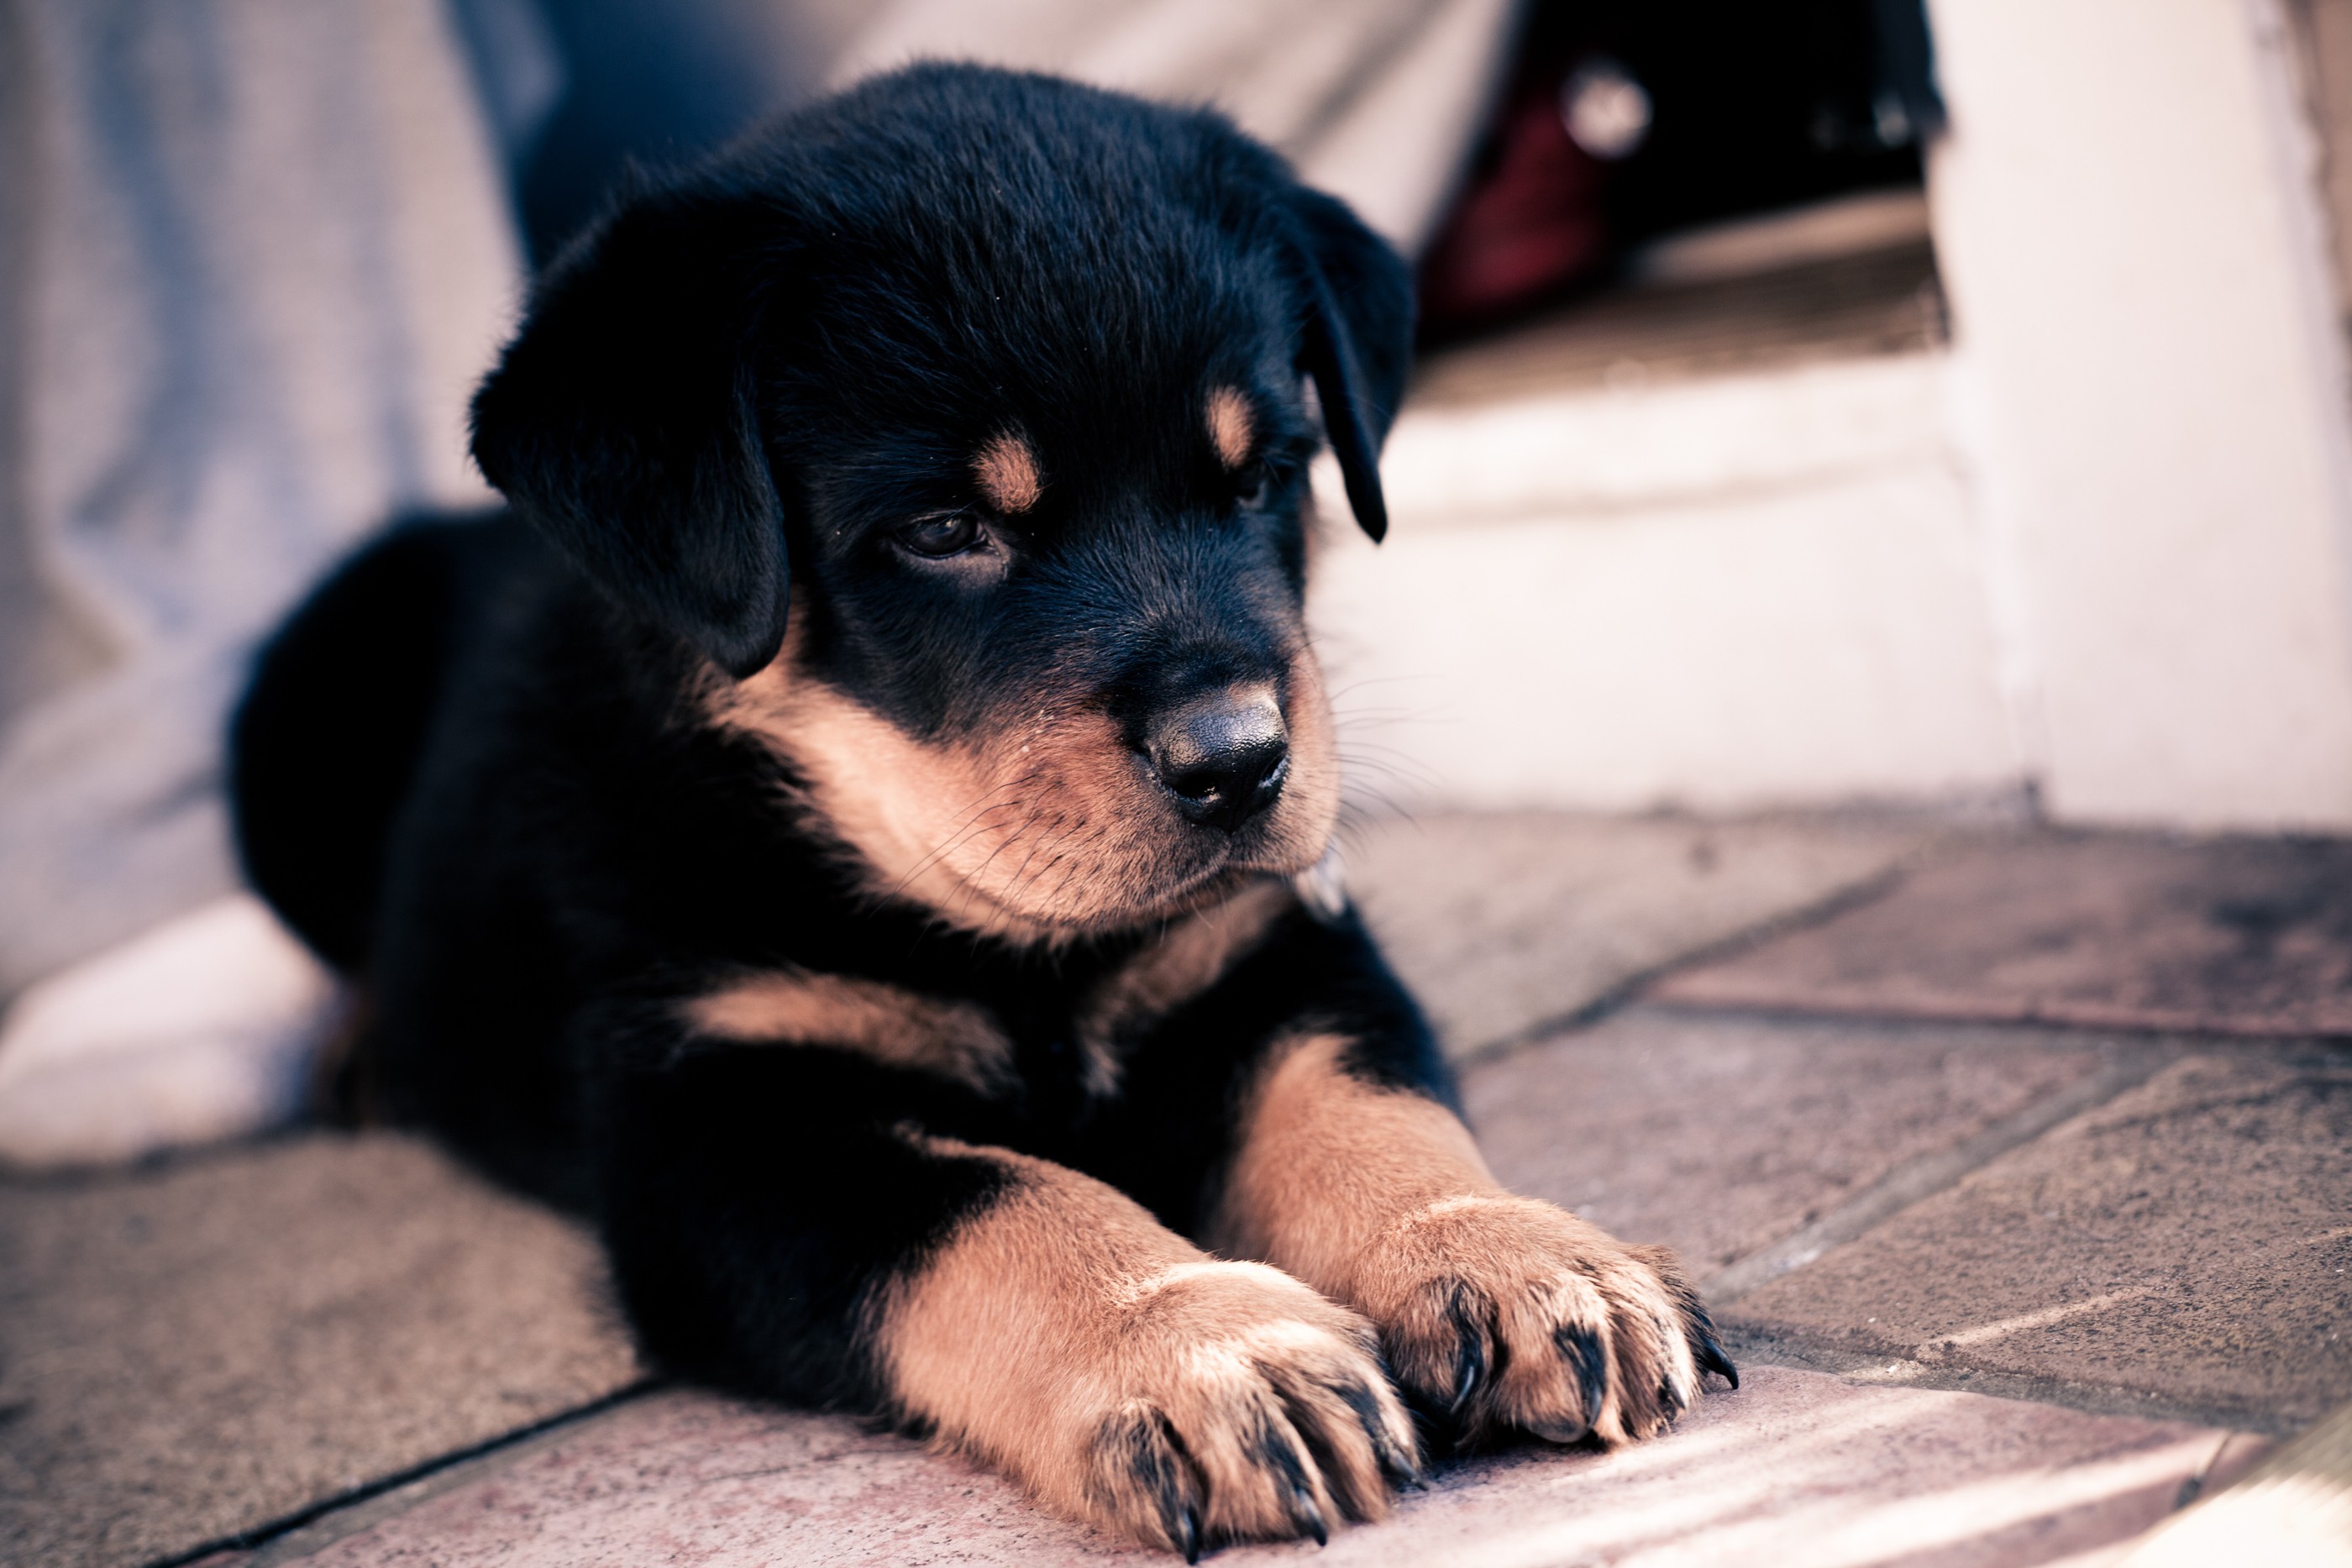 muzzle, animals, dog, puppy, paws, rottweiler lock screen backgrounds